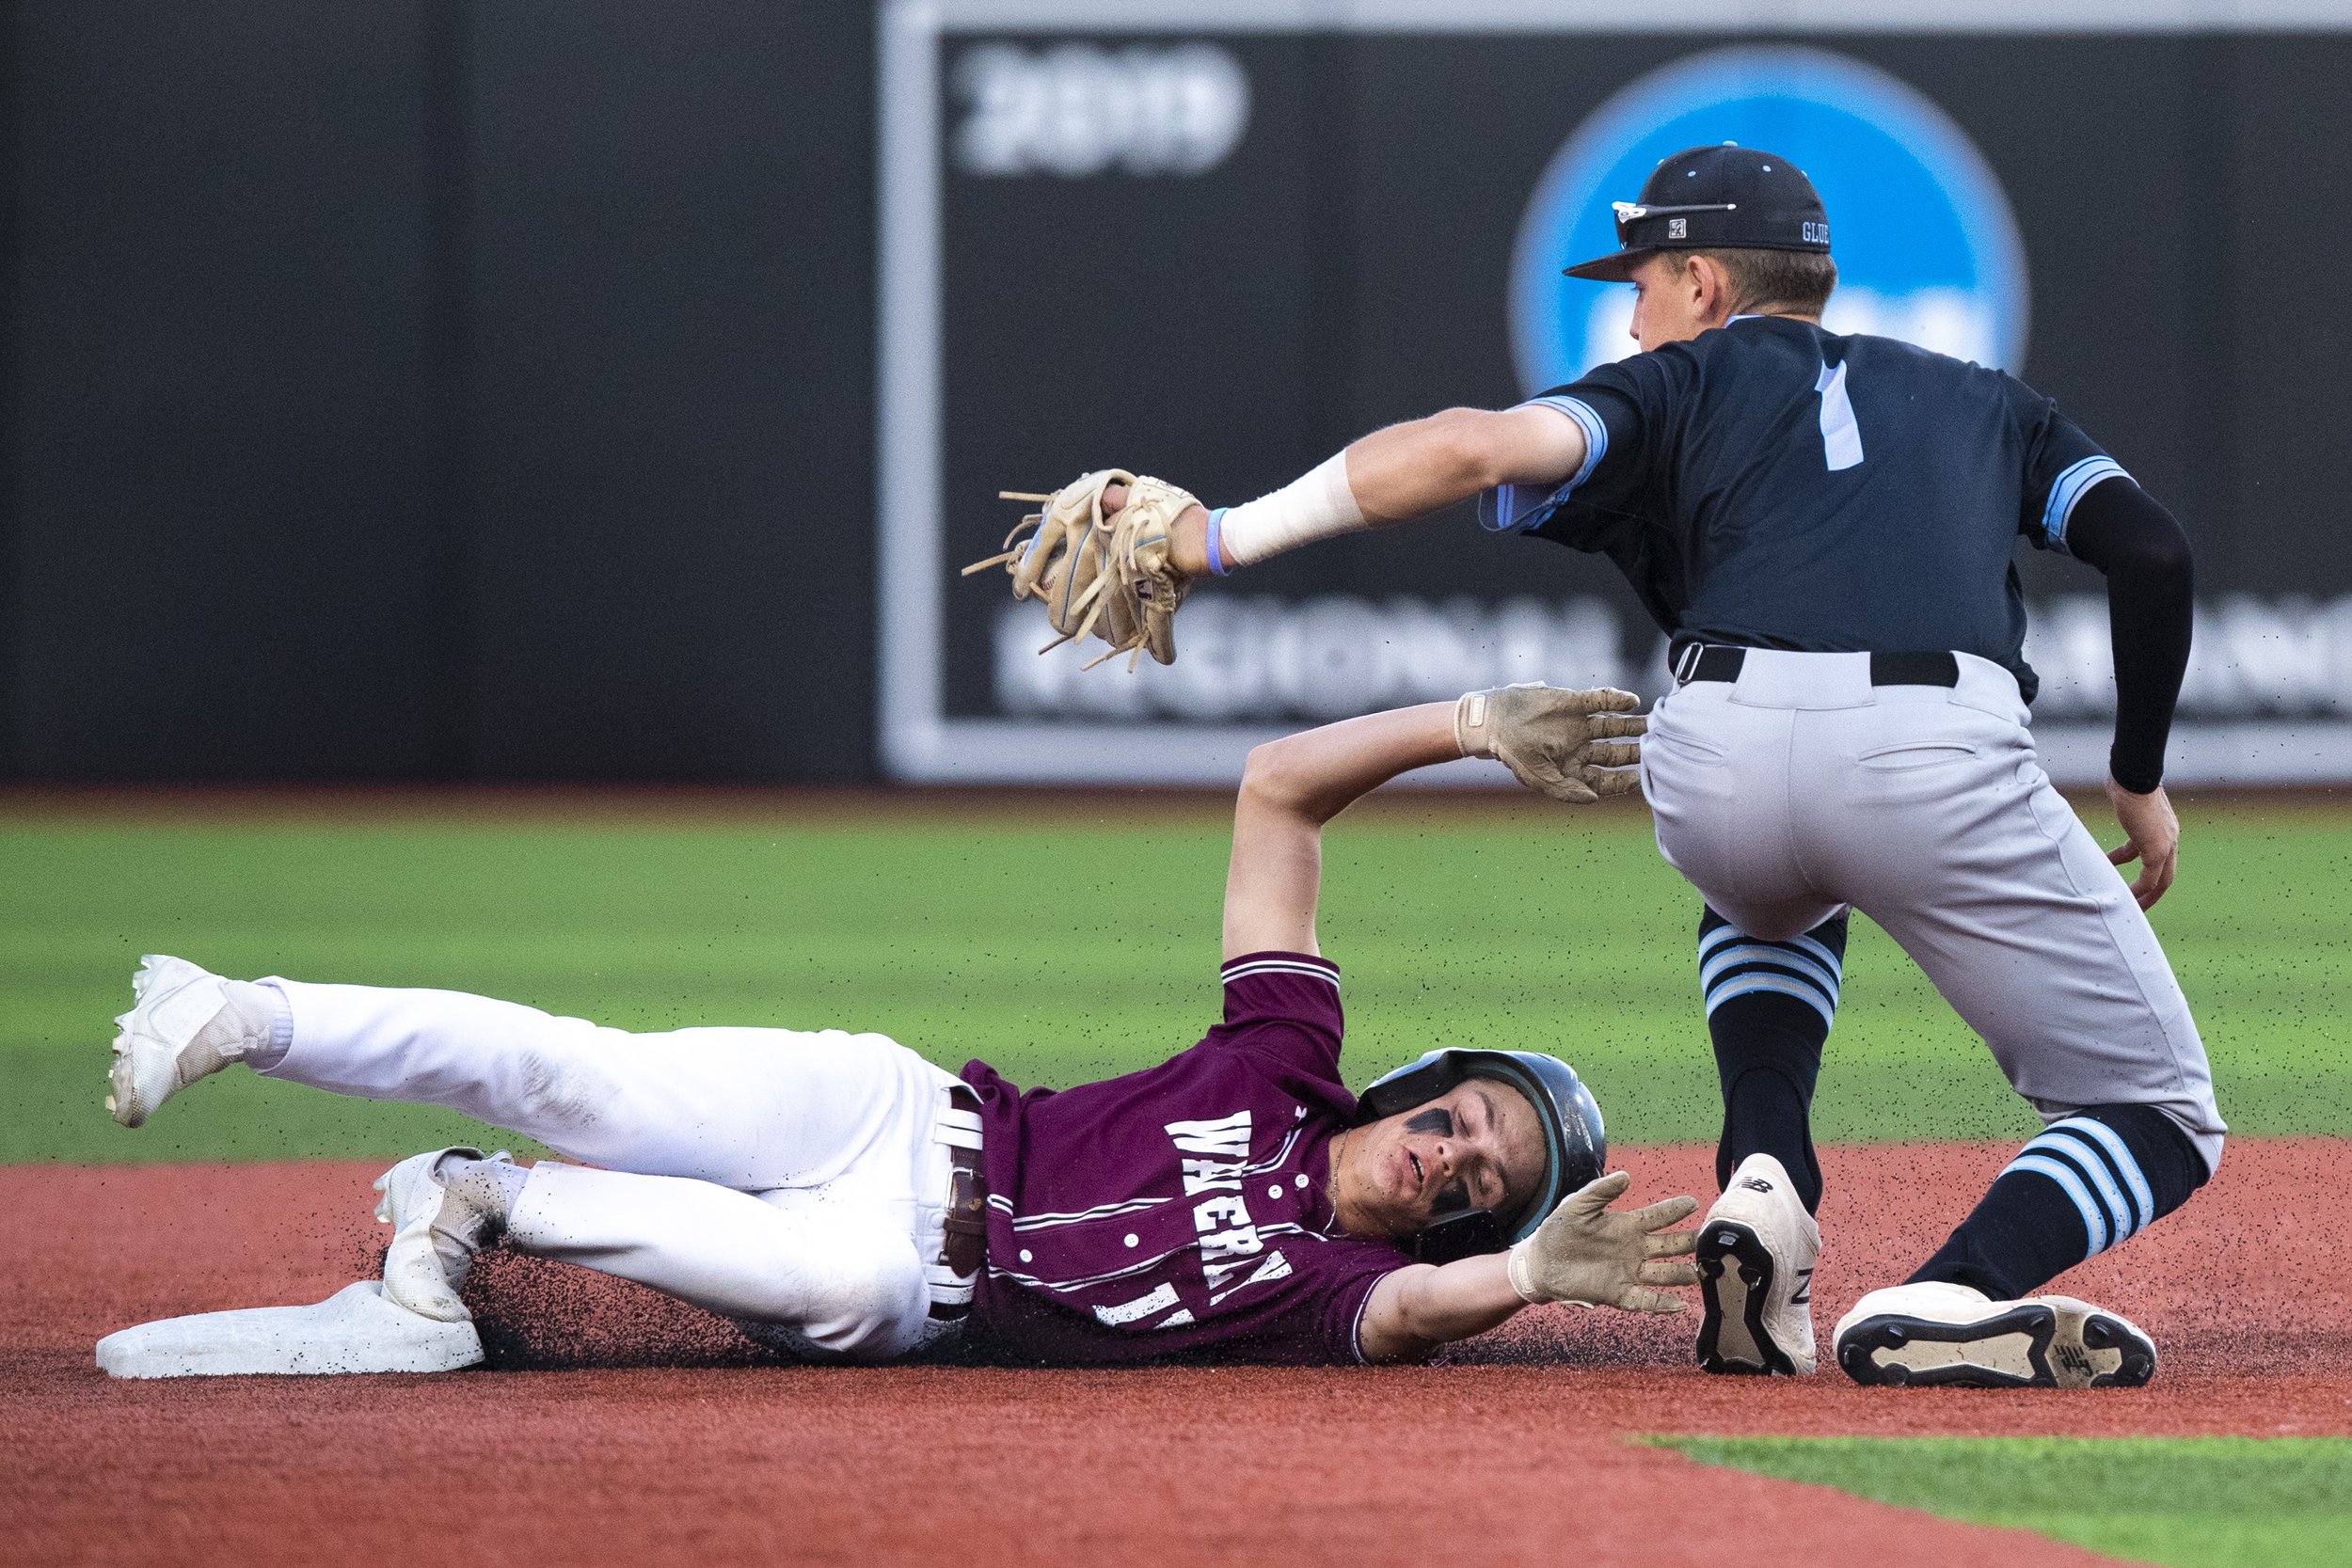  Waverly's  Aden Smith is tagged out while sliding to second base by Elkhonrn North 's Nathan Cunningham in the third inning during the Class B championship at Tal Anderson Field on May 20, 2022, in Omaha, Nebraska. 